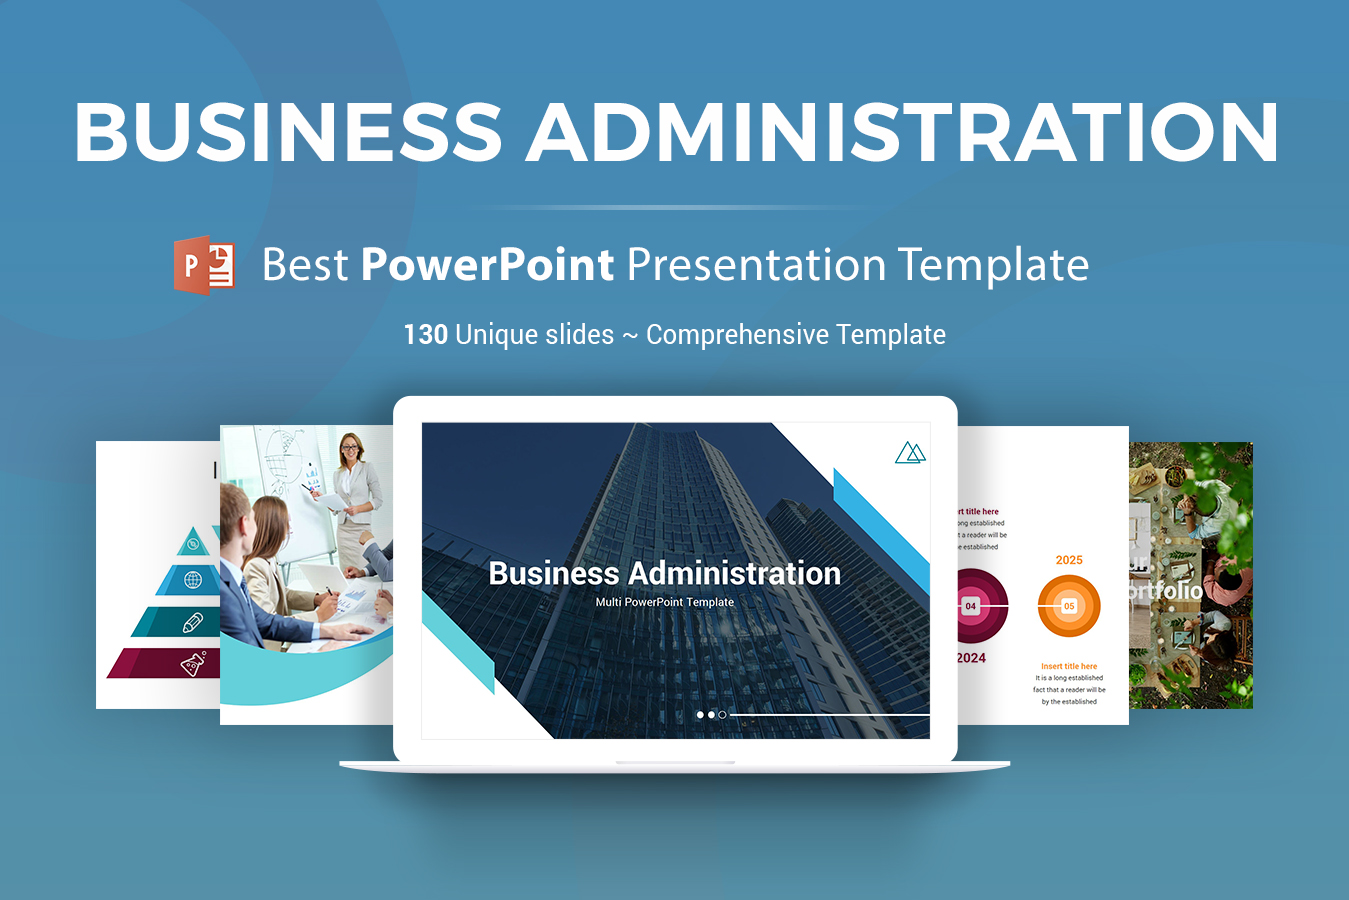 Business Administration PowerPoint template